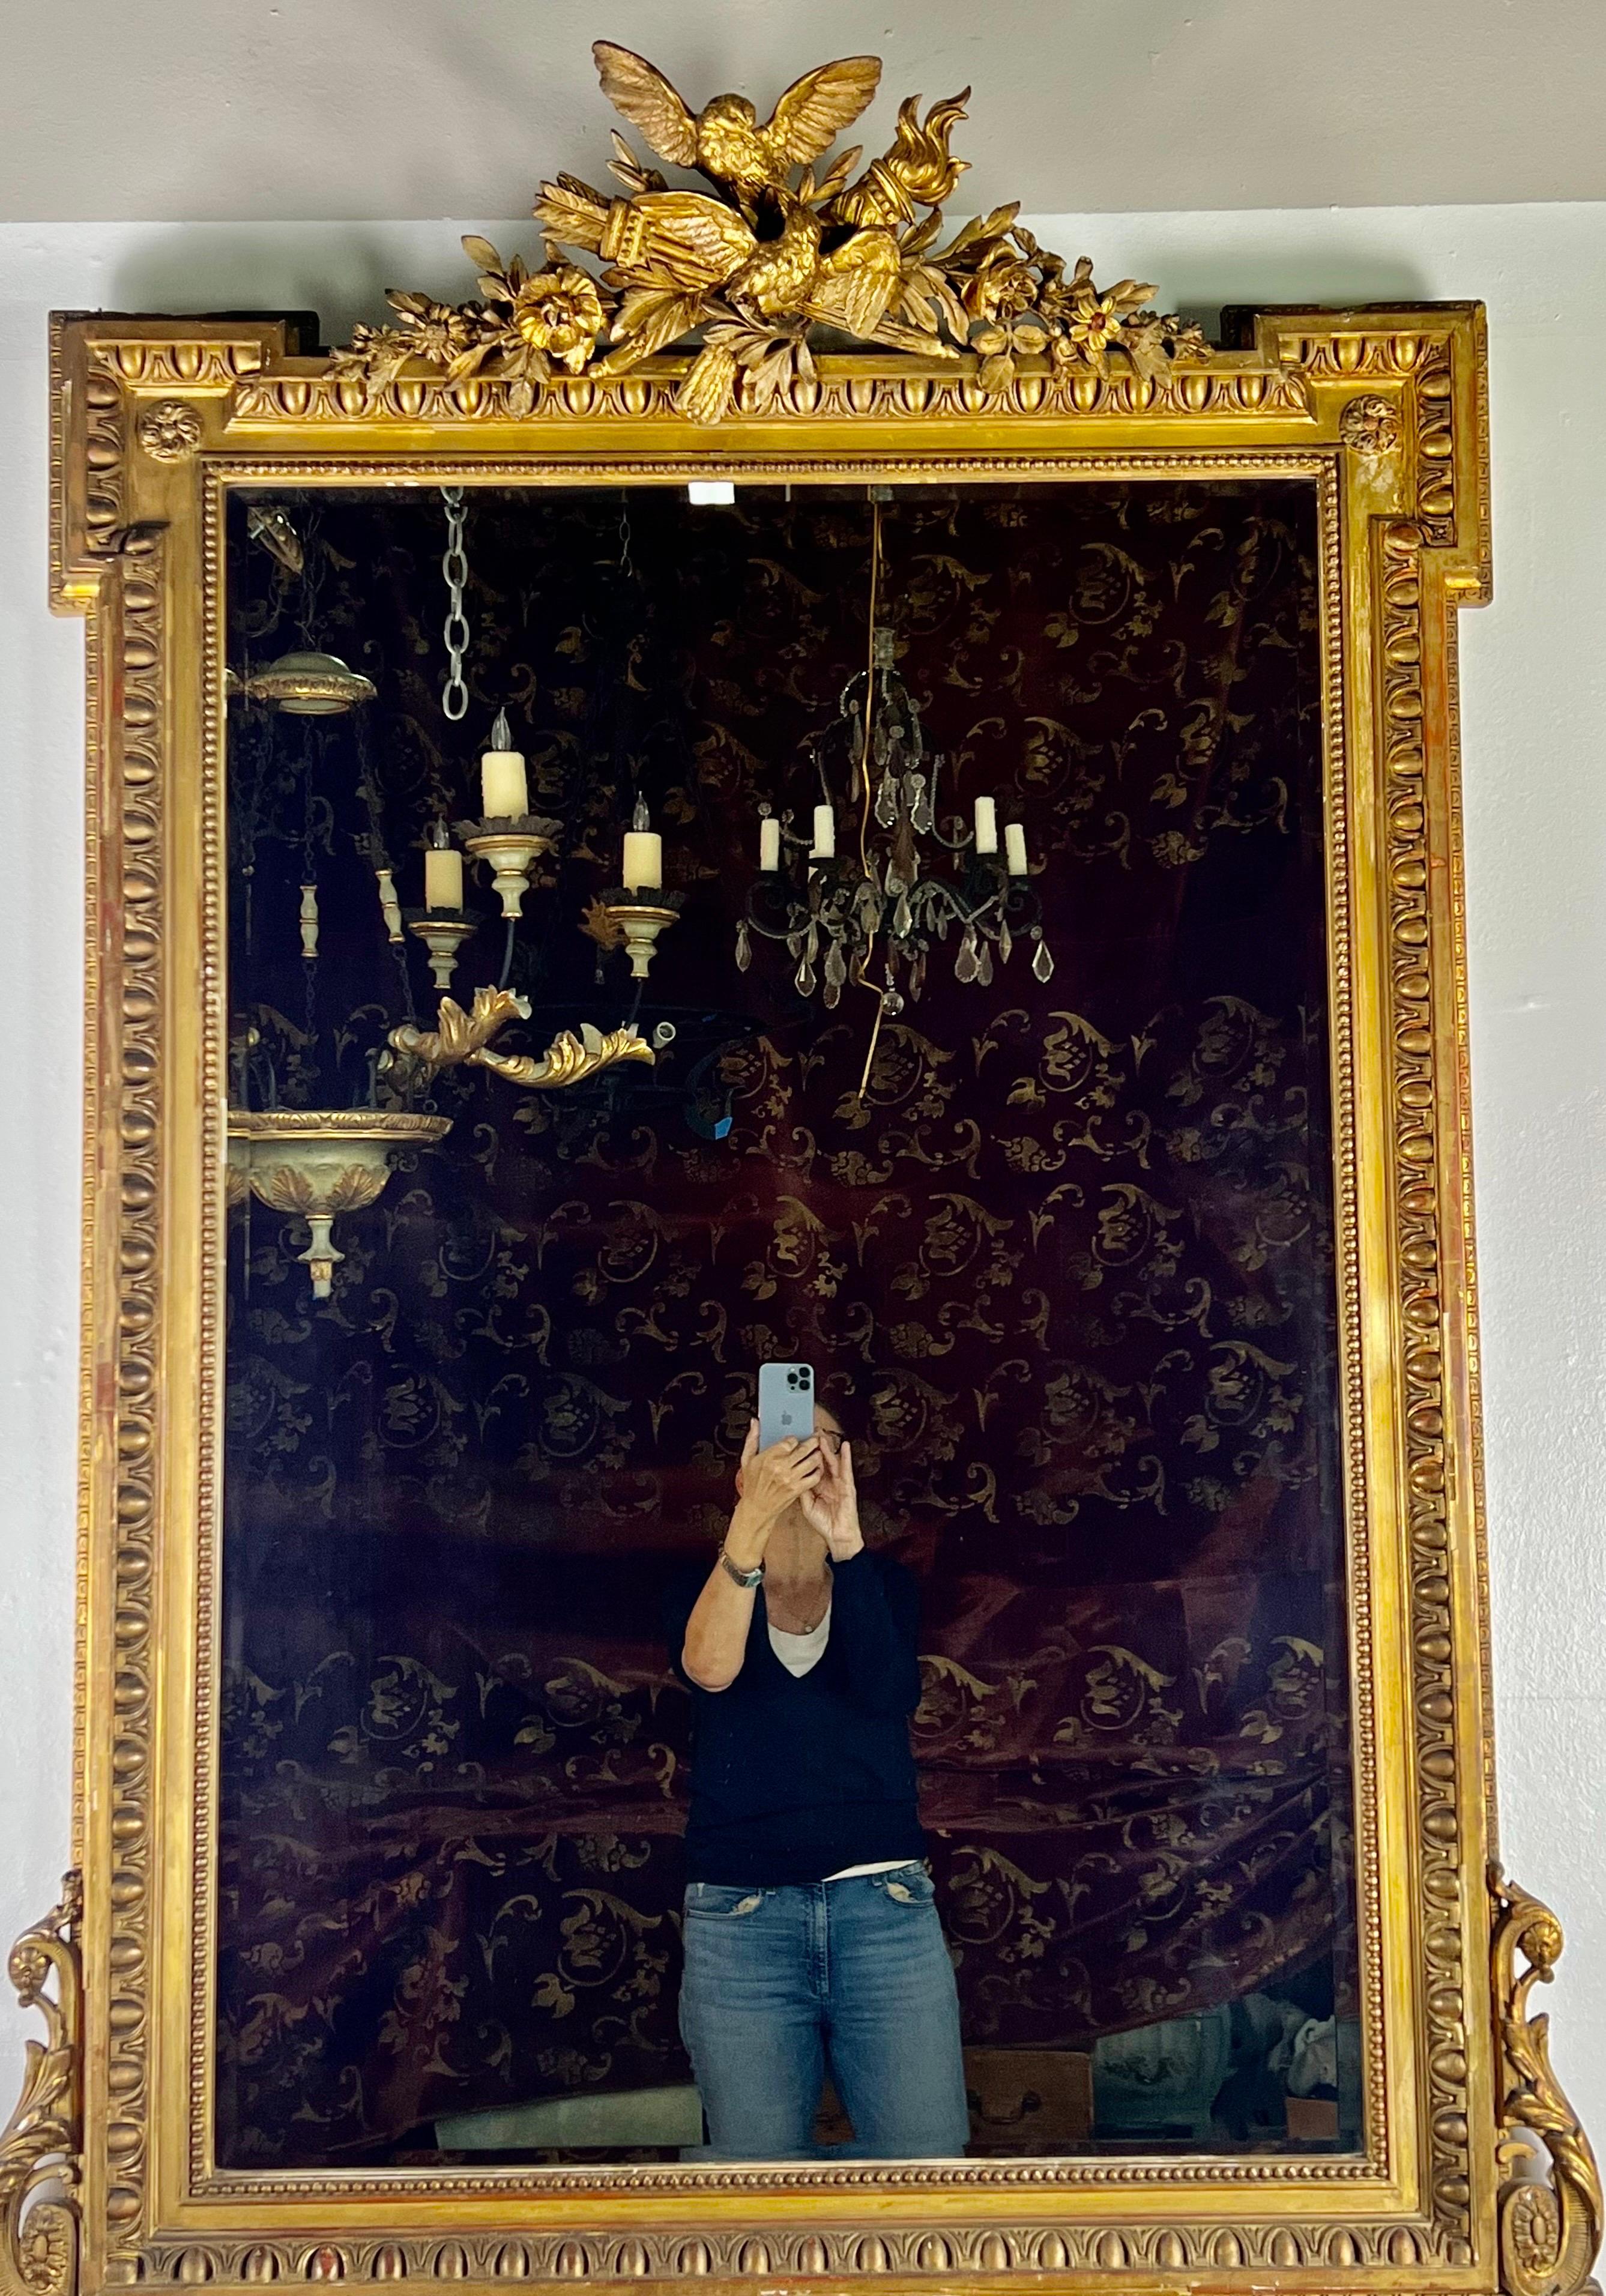 19th century French neoclassical style Giltwood mirror. The mirror is beautifully finished in 22K gold leaf. The frame is finely detailed with a pair of birds at the top with crossed torches and flowers throughout. The frame is detailed with an egg